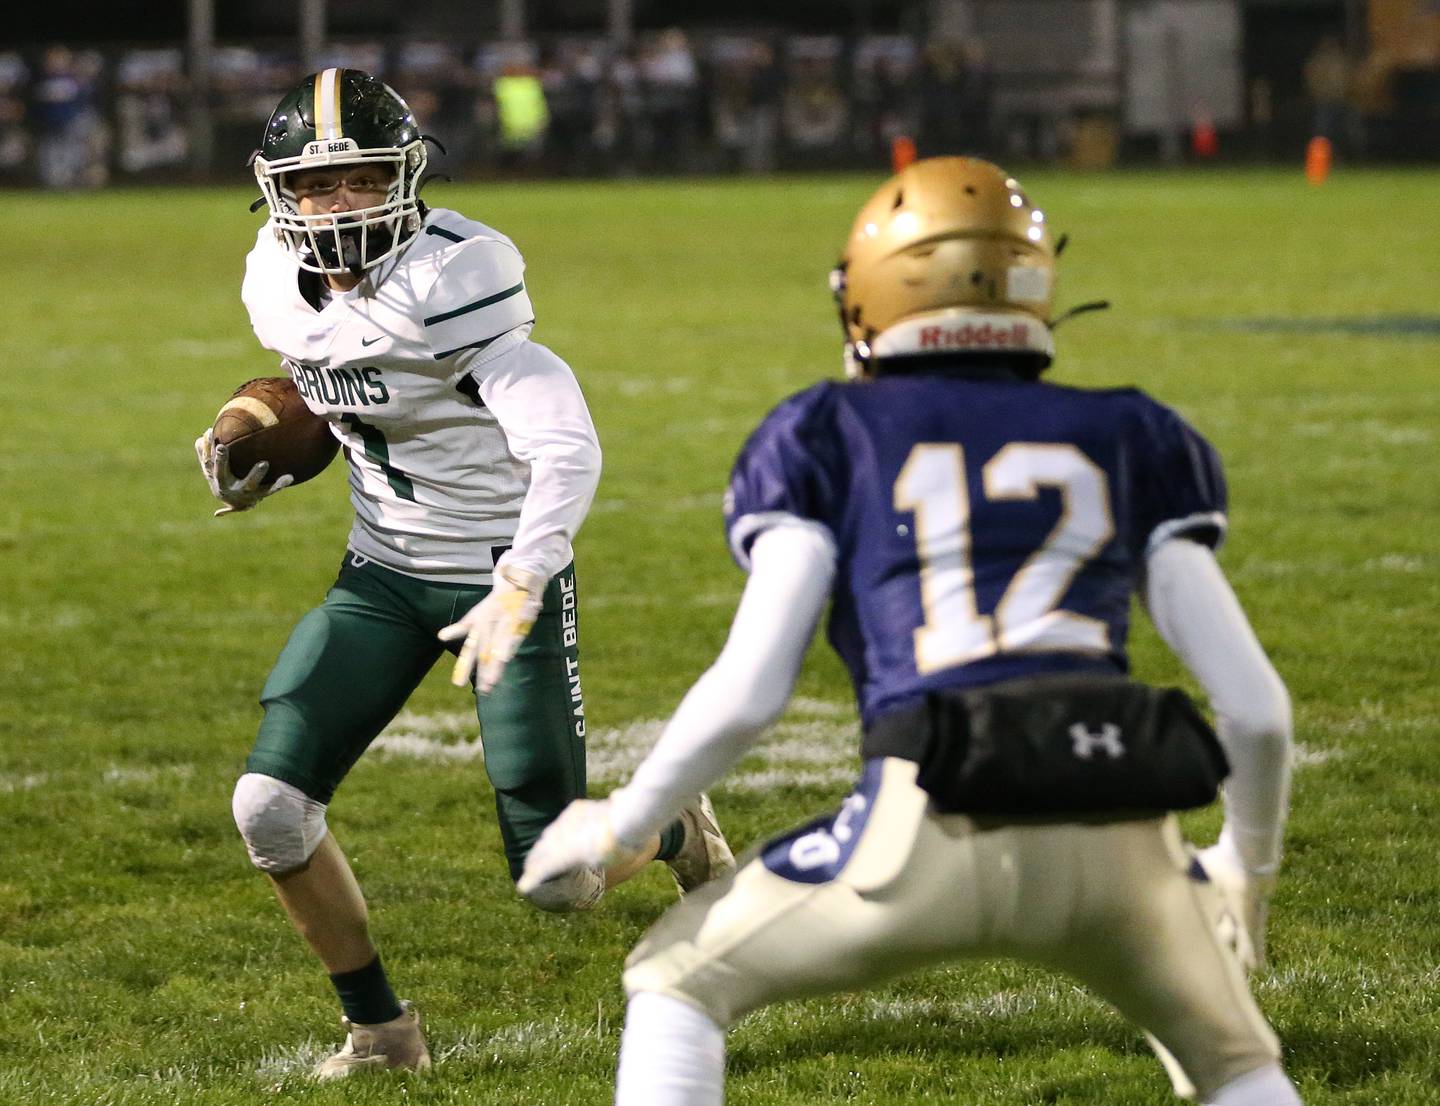 St. Bede's Alex Ankiewicz runs the ball as Marquette's Rush Keefer defends on Friday, Oct. 13, 2023 at Gould Stadium.